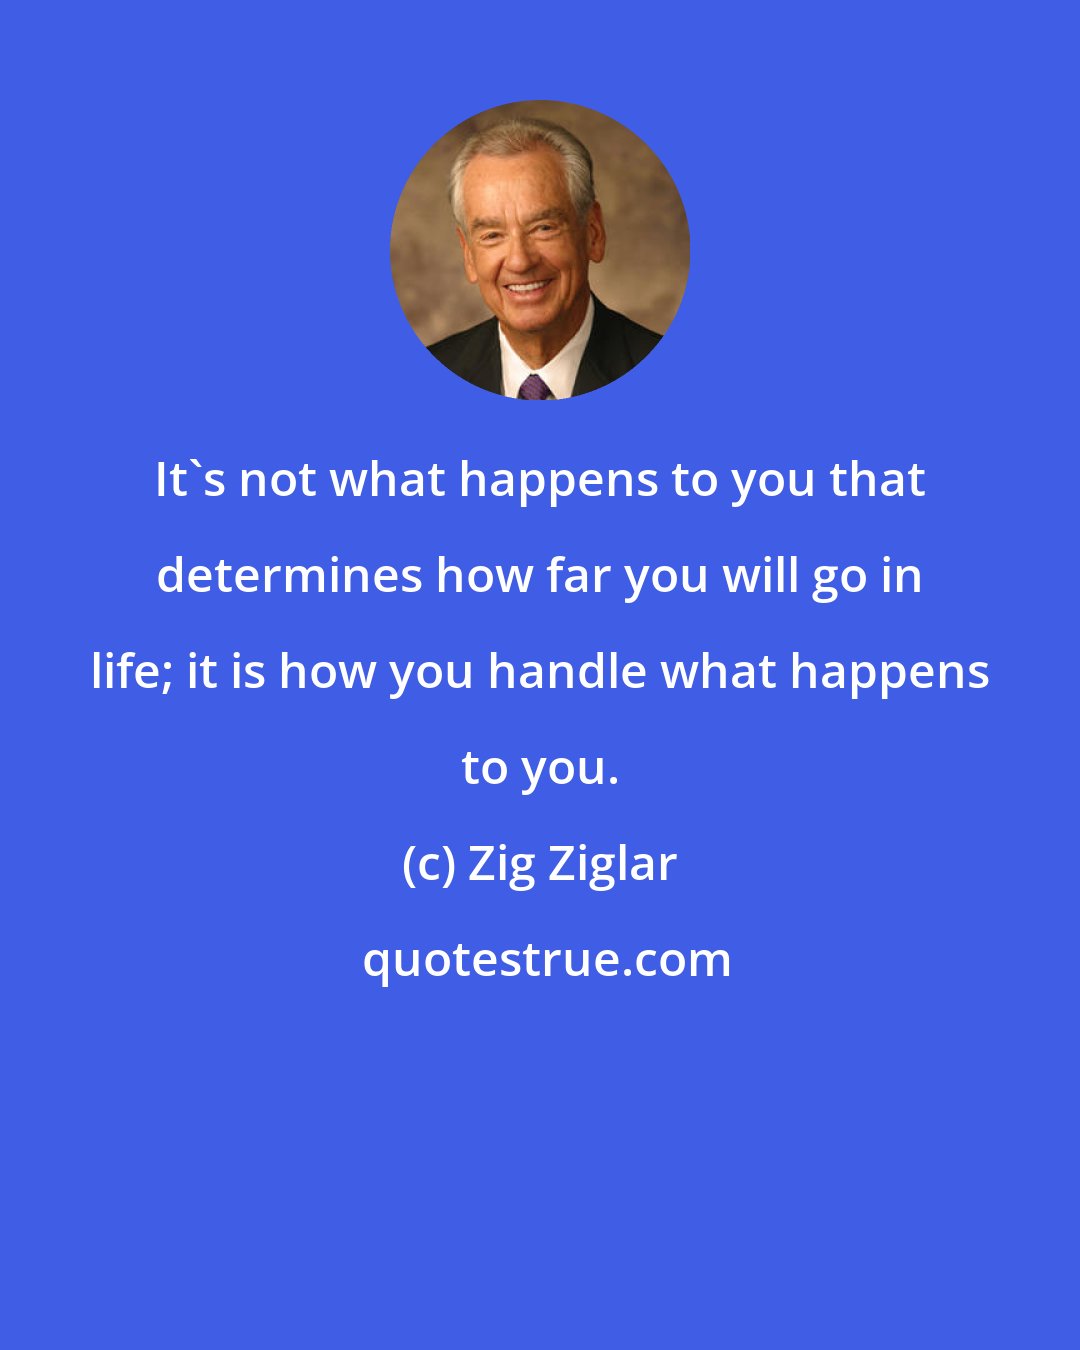 Zig Ziglar: It's not what happens to you that determines how far you will go in life; it is how you handle what happens to you.